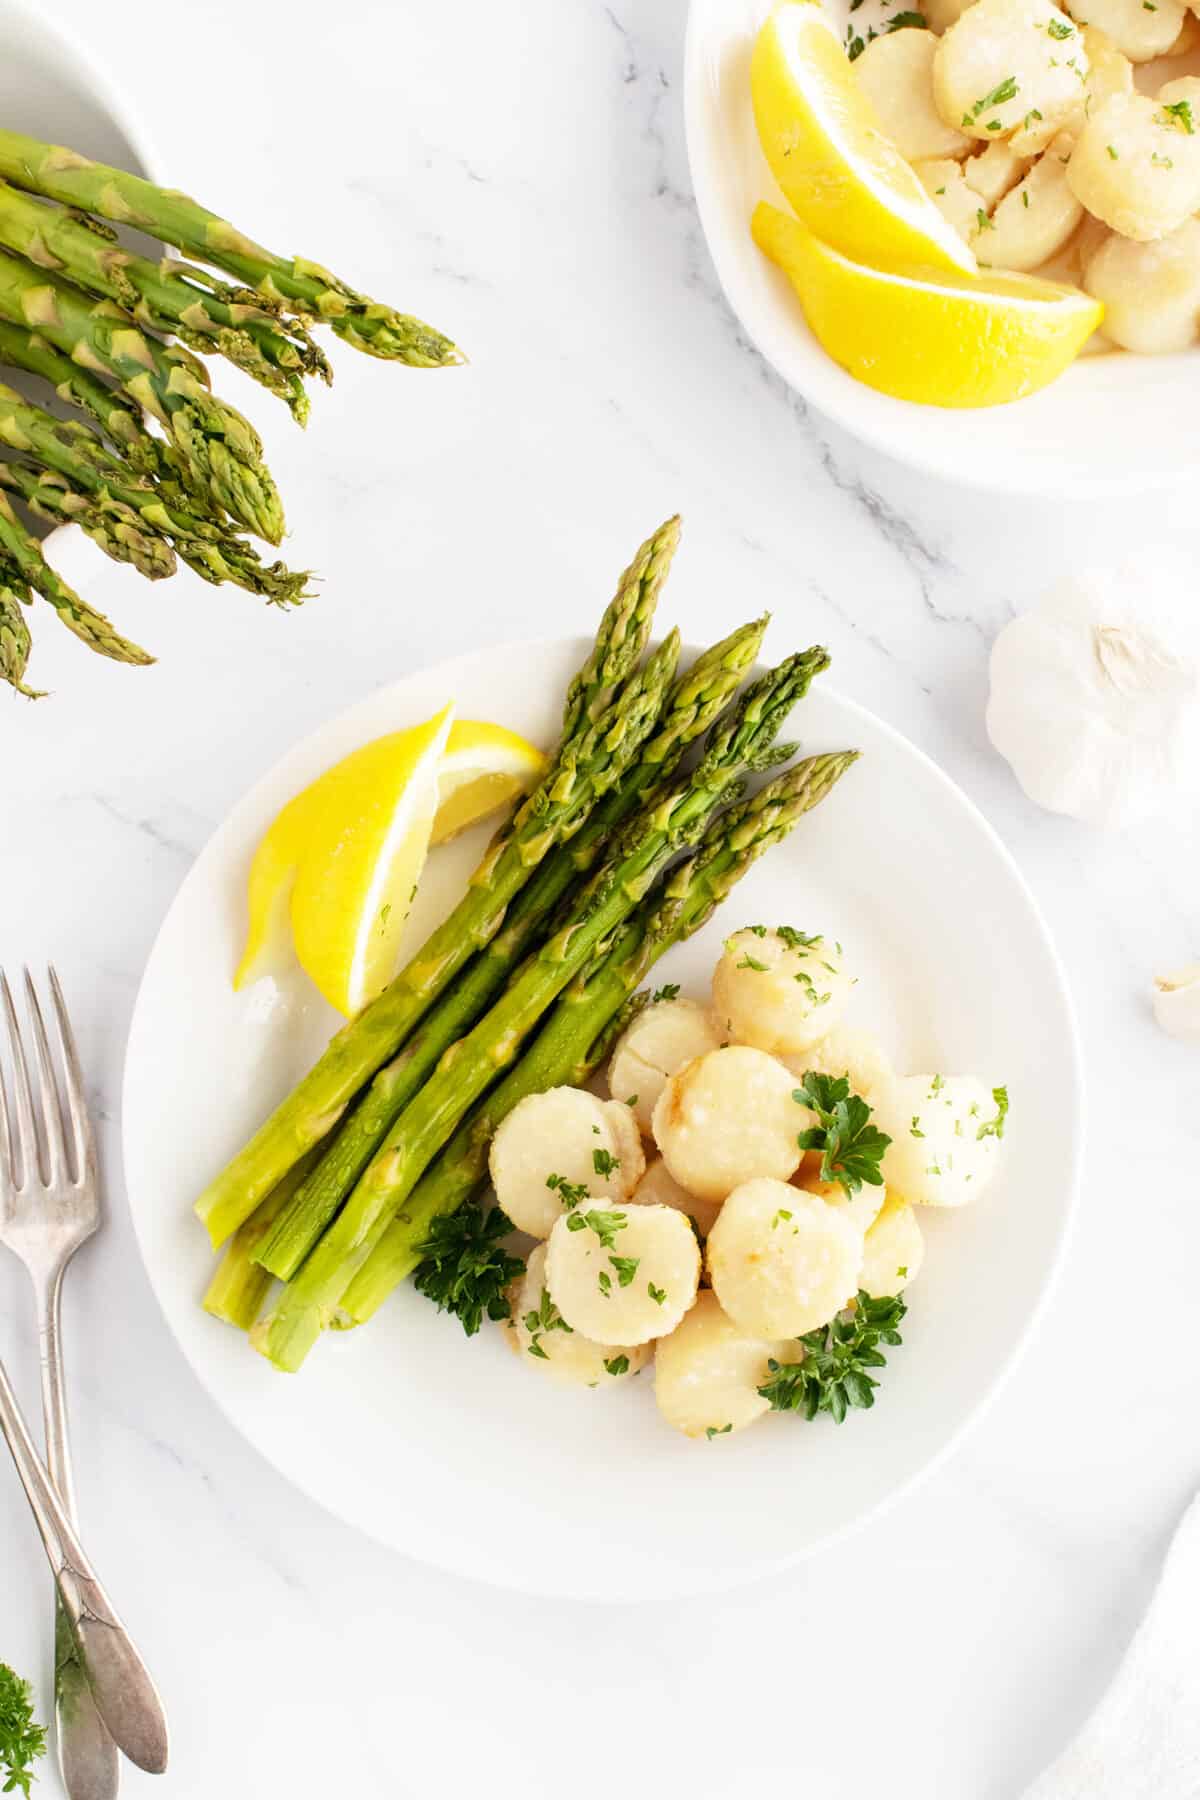 Broiled scallops on a white plate with asparagus